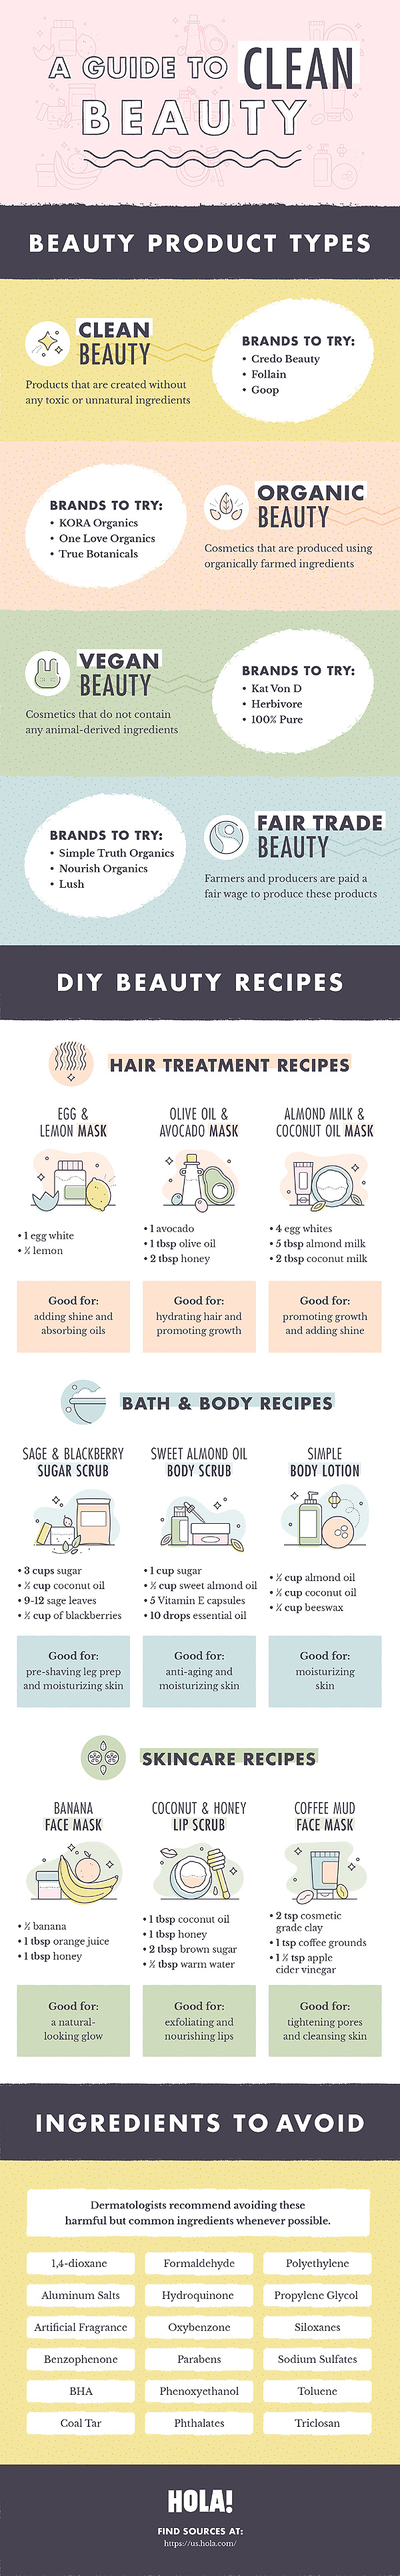 A Guide to Clean Beauty